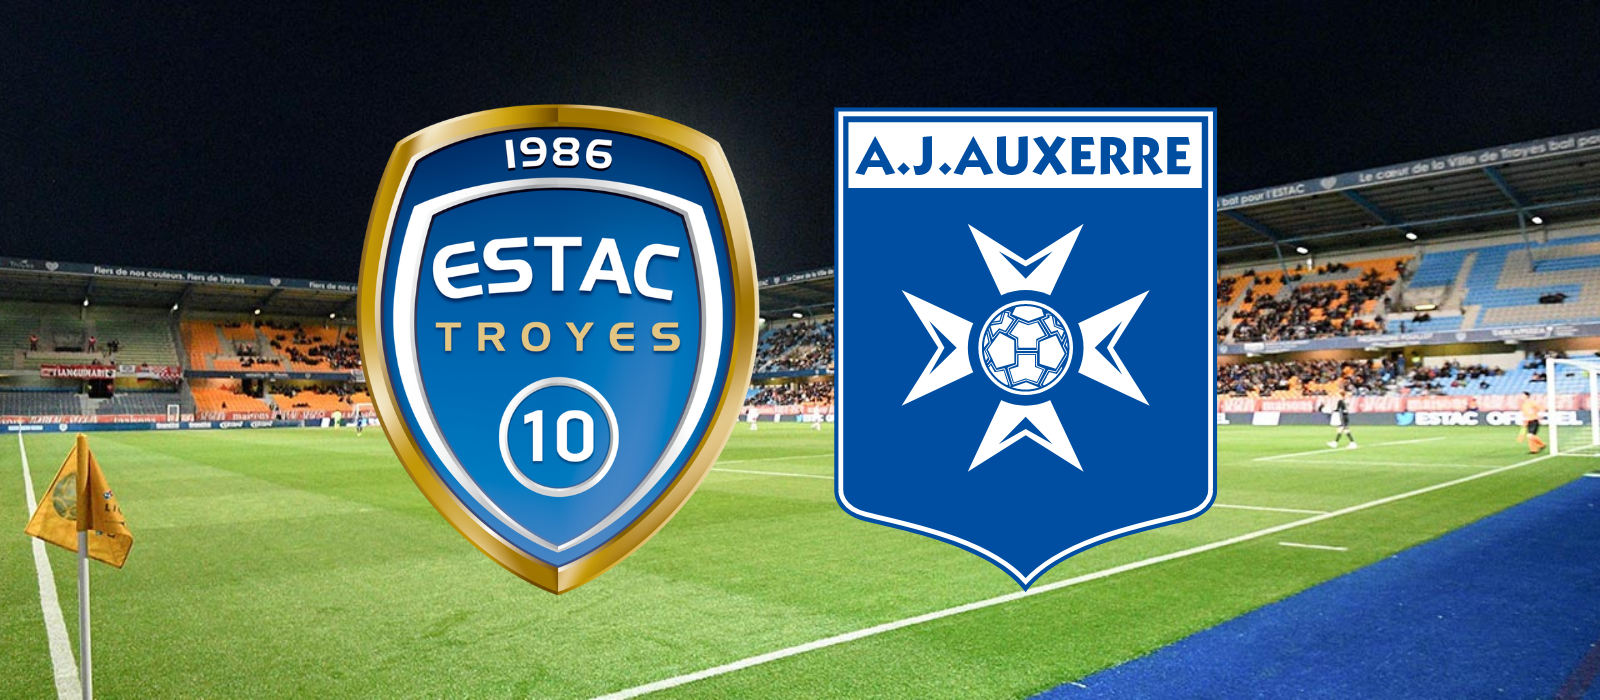 Pronostic Troyes Auxerre